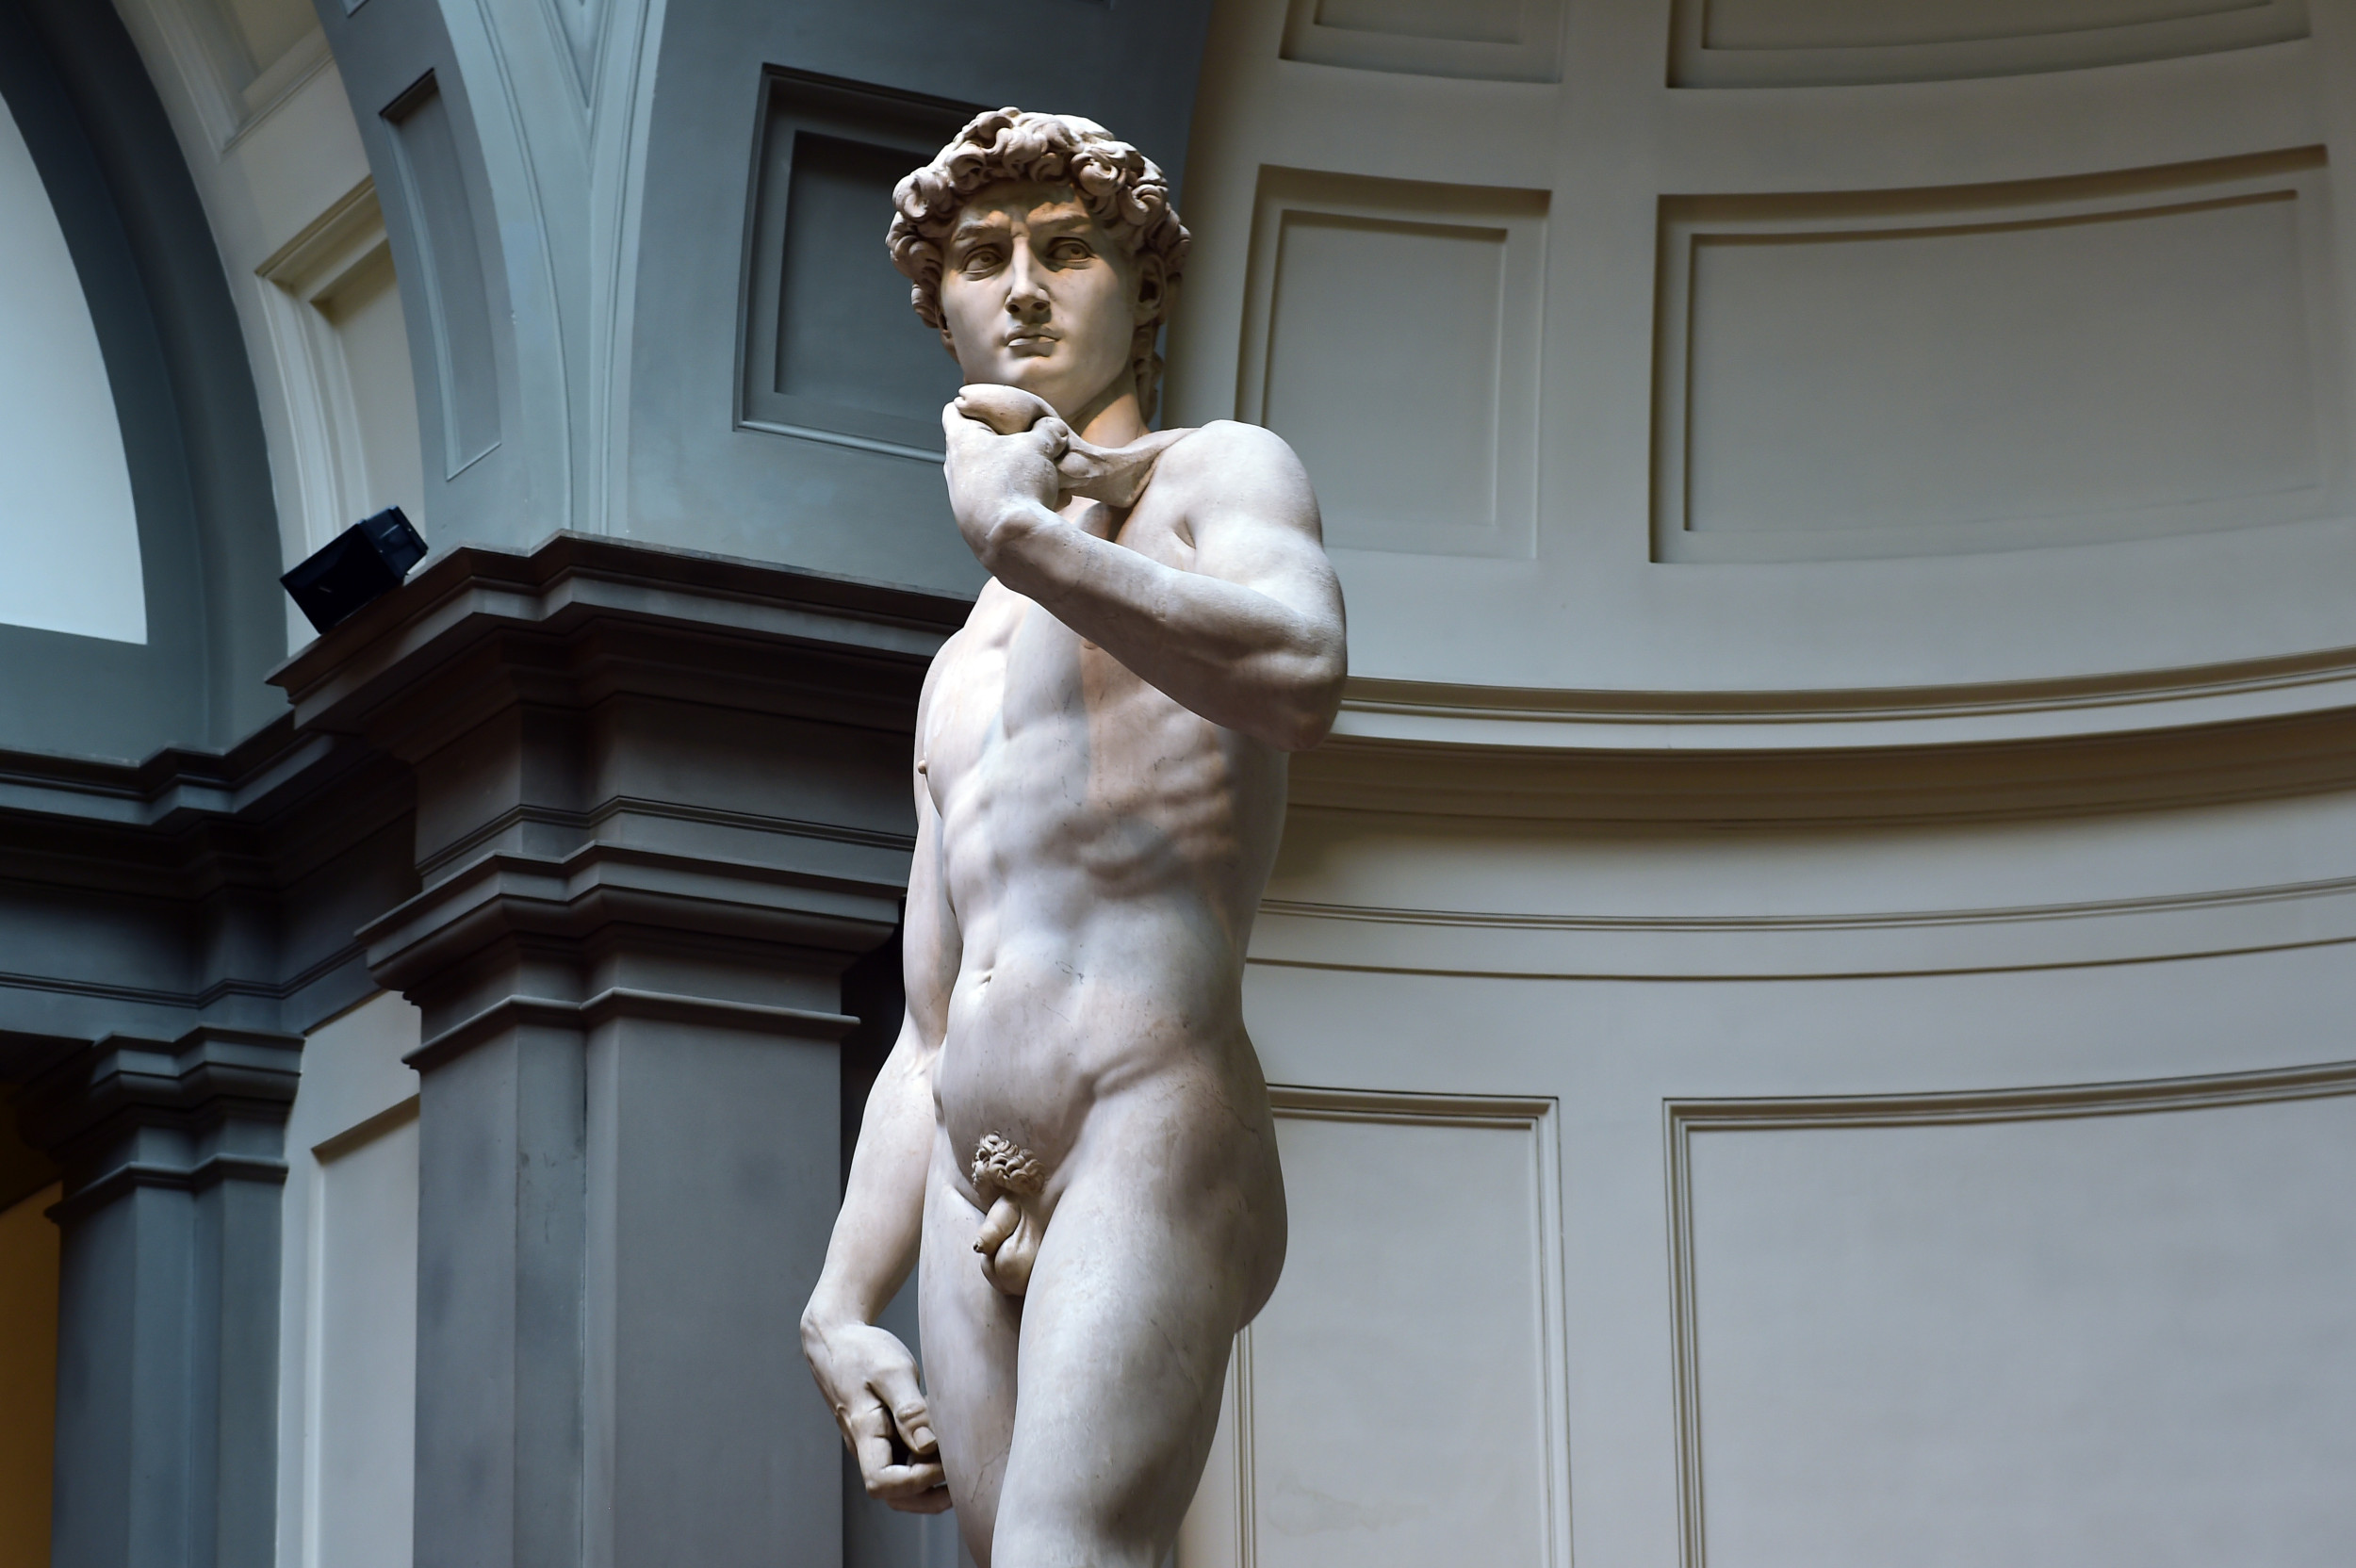 Florida Principal’s Ousting Over David Statue Causes Stir in Italy